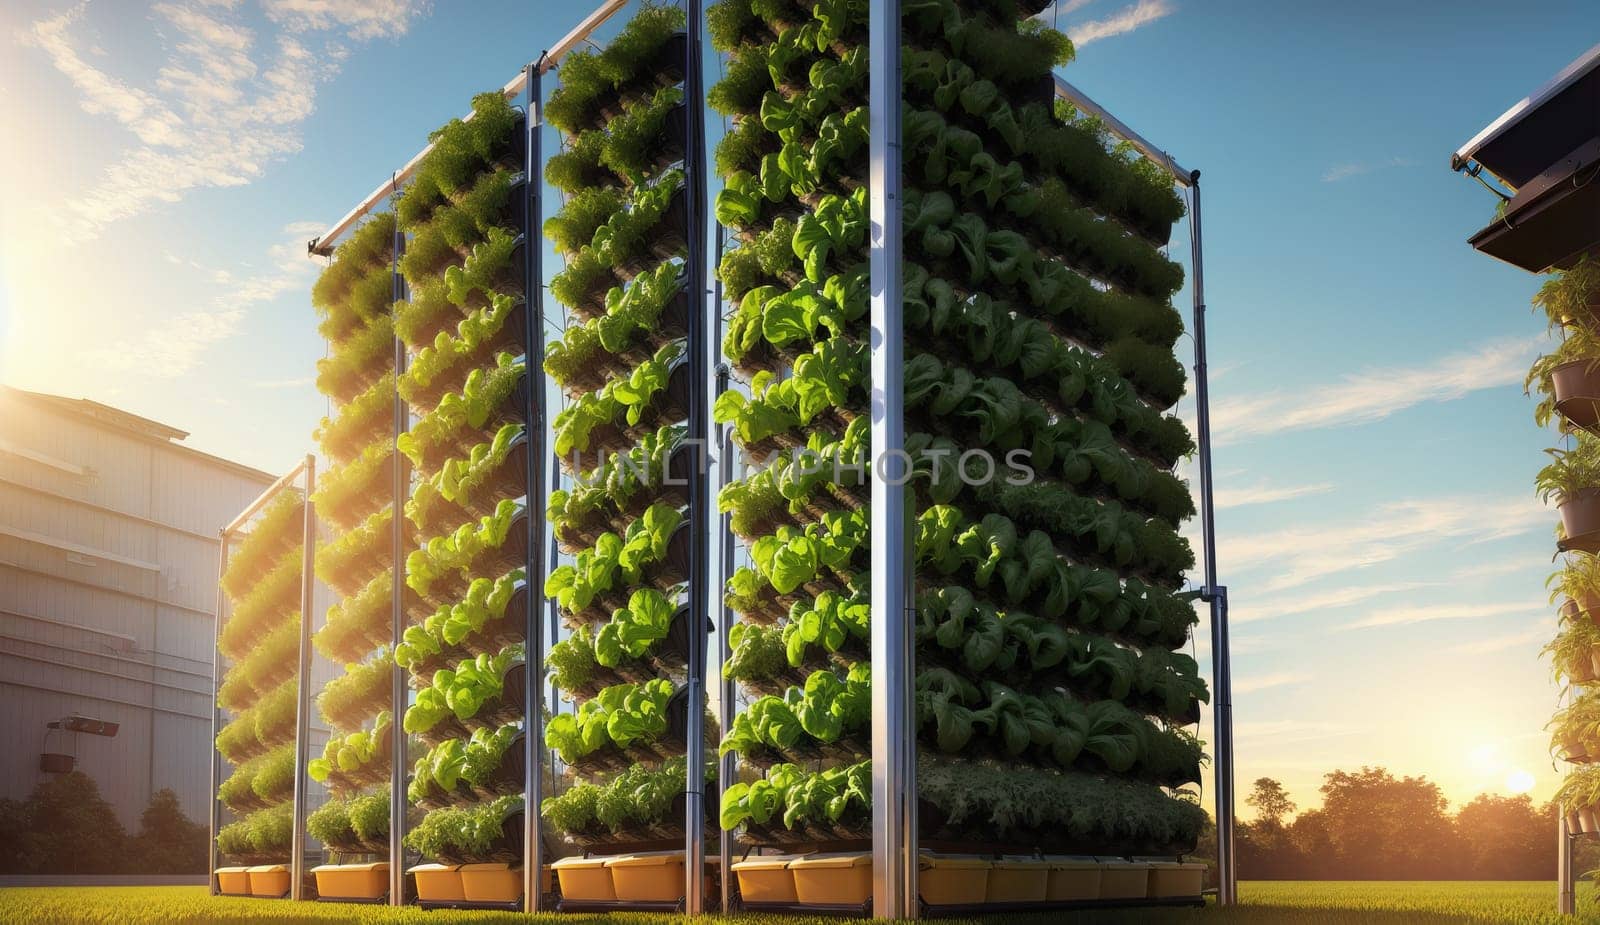 Urban design meets nature with a vertical garden on a tower block, featuring plants, trees, and grass cascading down the building under a sky filled with fluffy clouds